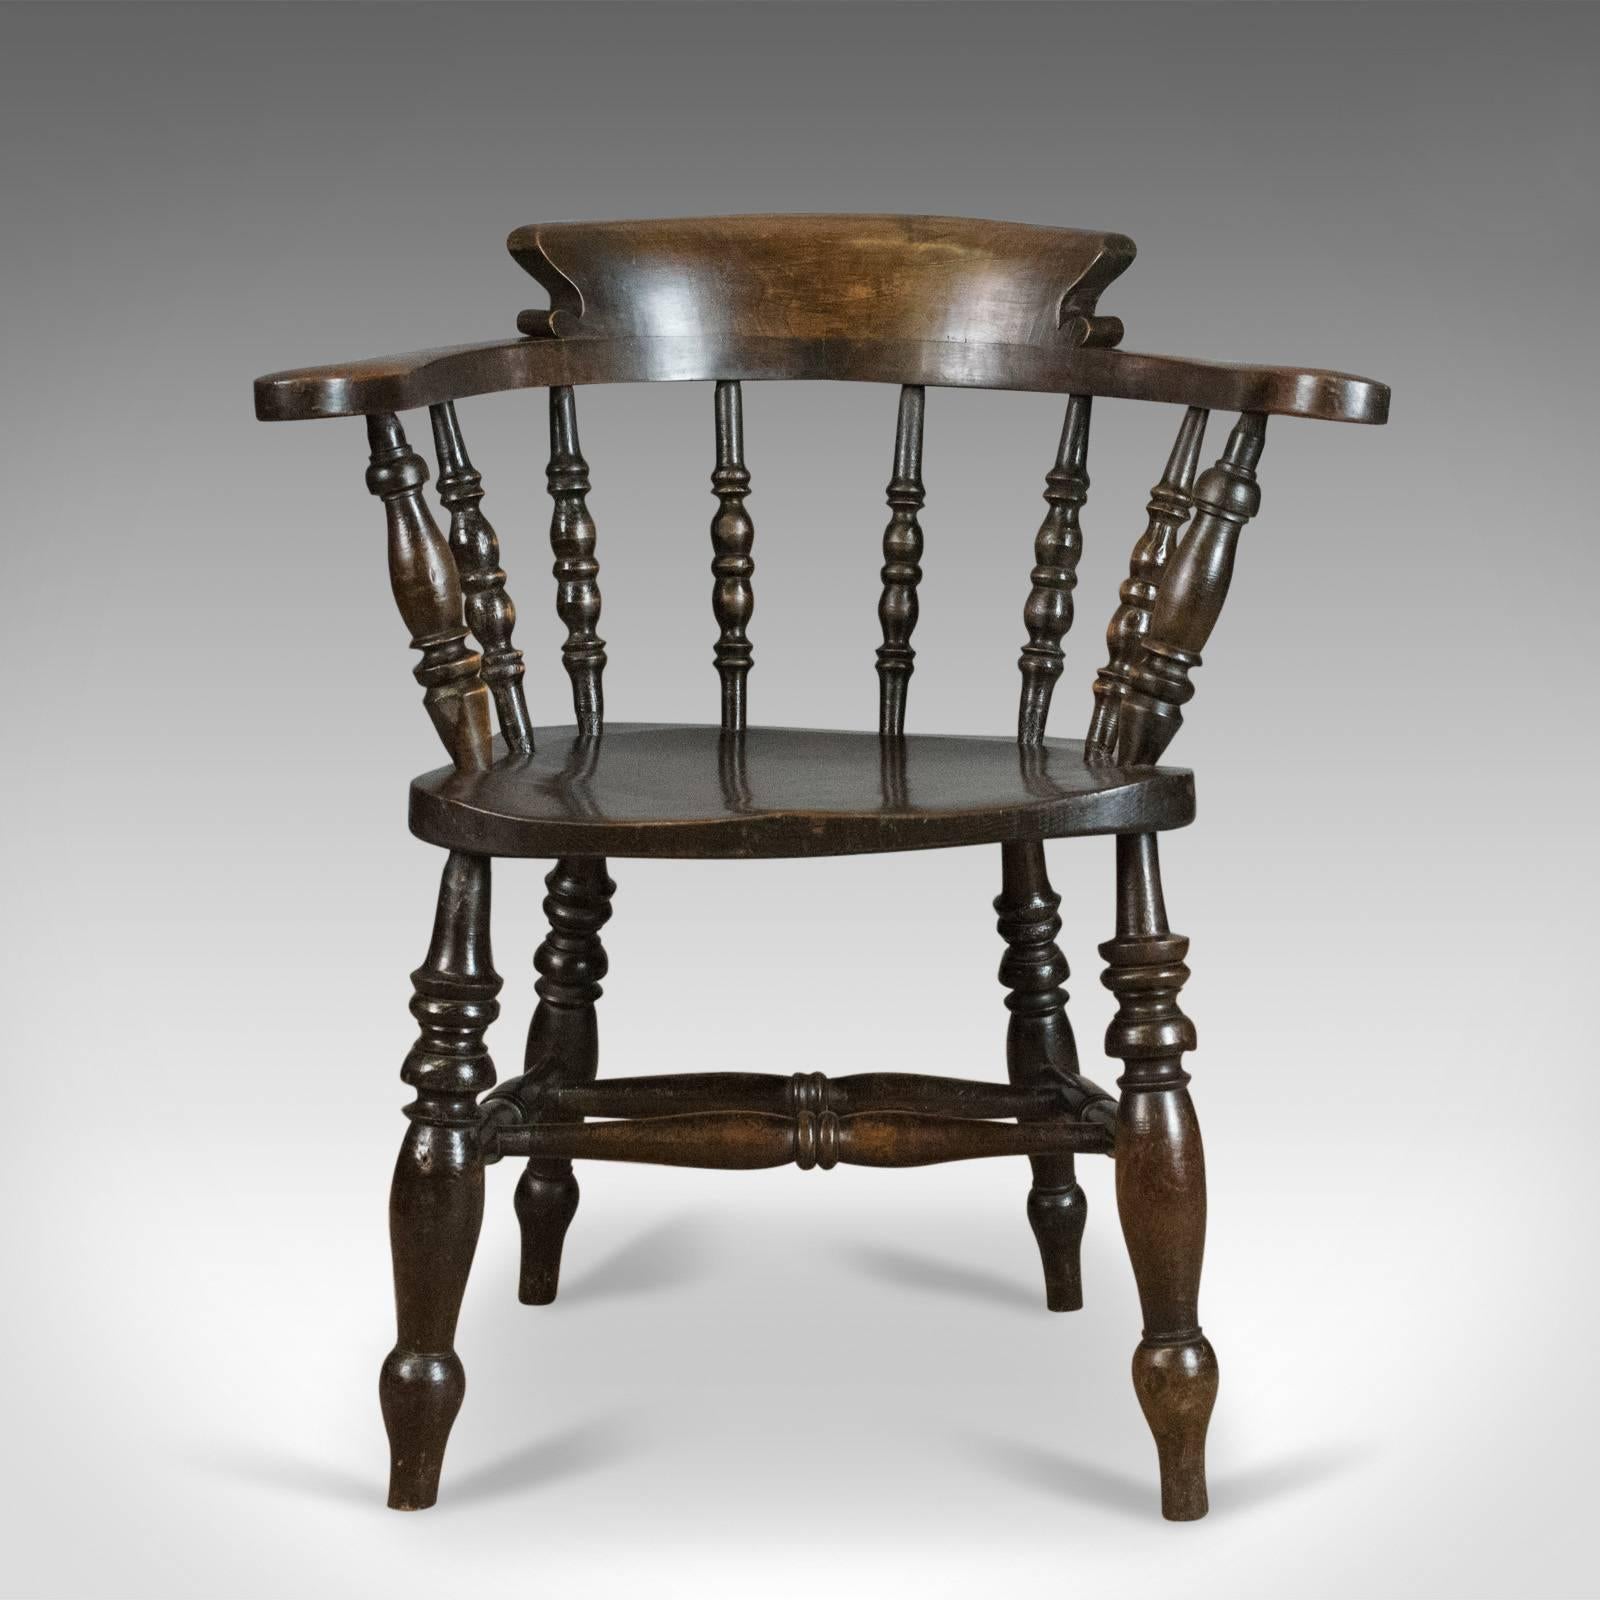 This is an antique armchair, an English, Victorian, elm, bow-back 'smokers', or 'captains', chair dating to circa 1900.

An appealing country kitchen, bow back armchair
Grain interest to the elm and beech in a wax polished finish
Solid and